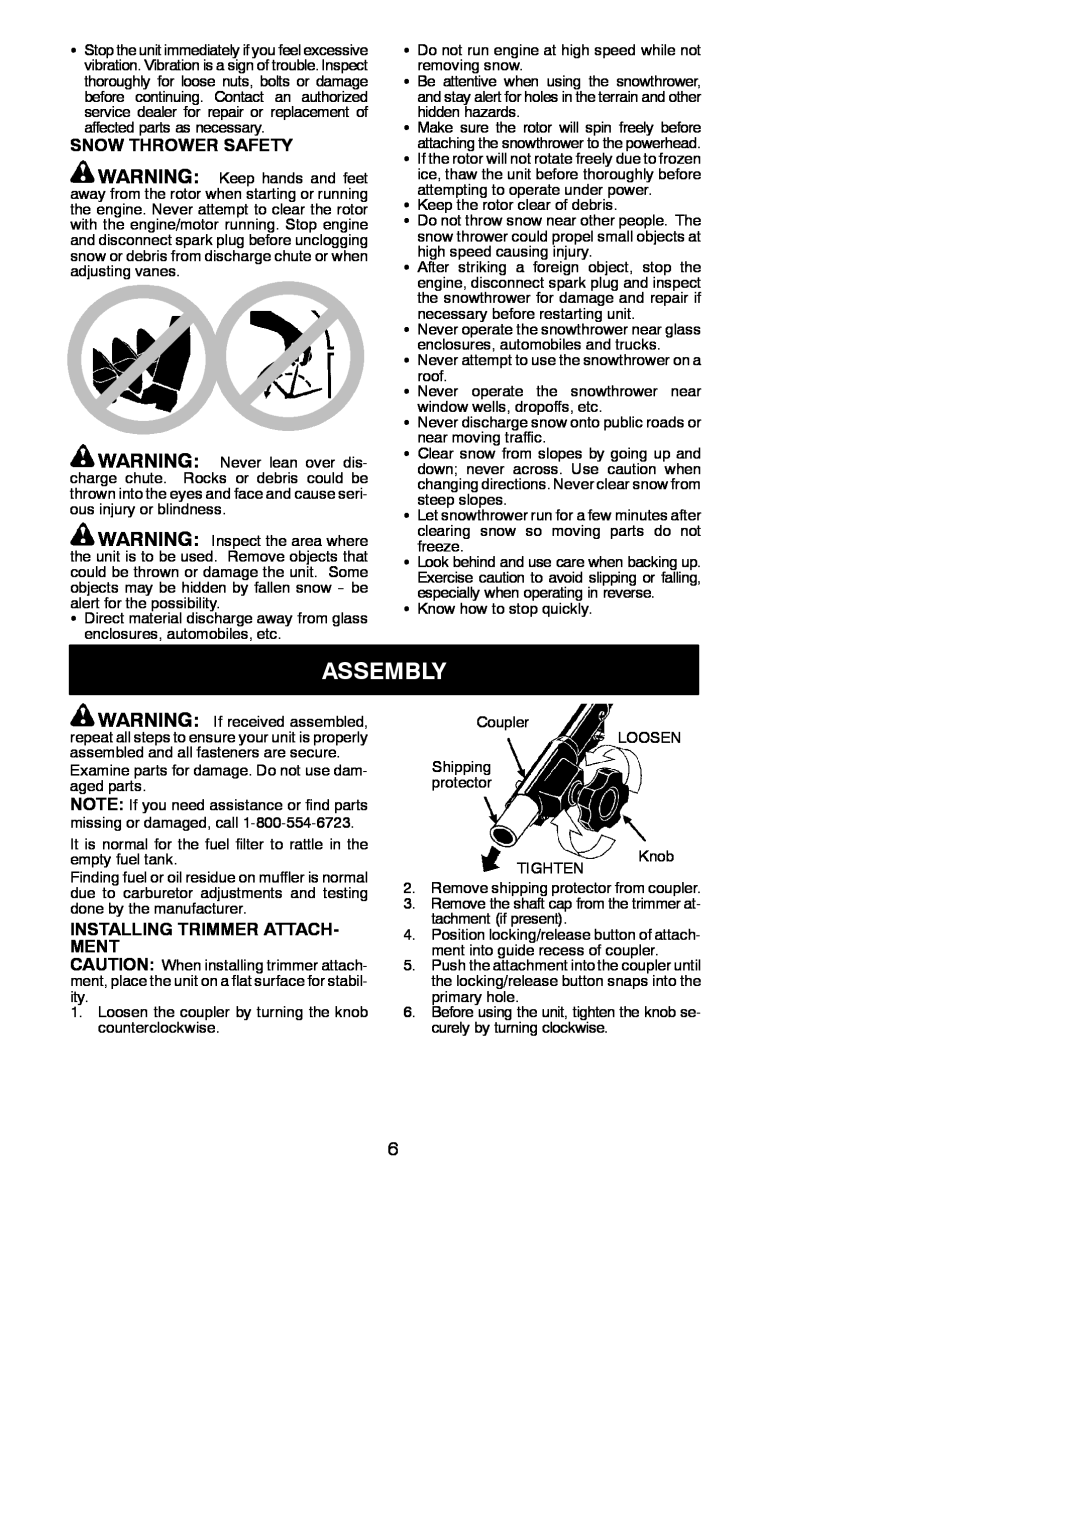 Poulan PP125 instruction manual Assembly, Snow Thrower Safety, Installing Trimmer Attach- Ment 